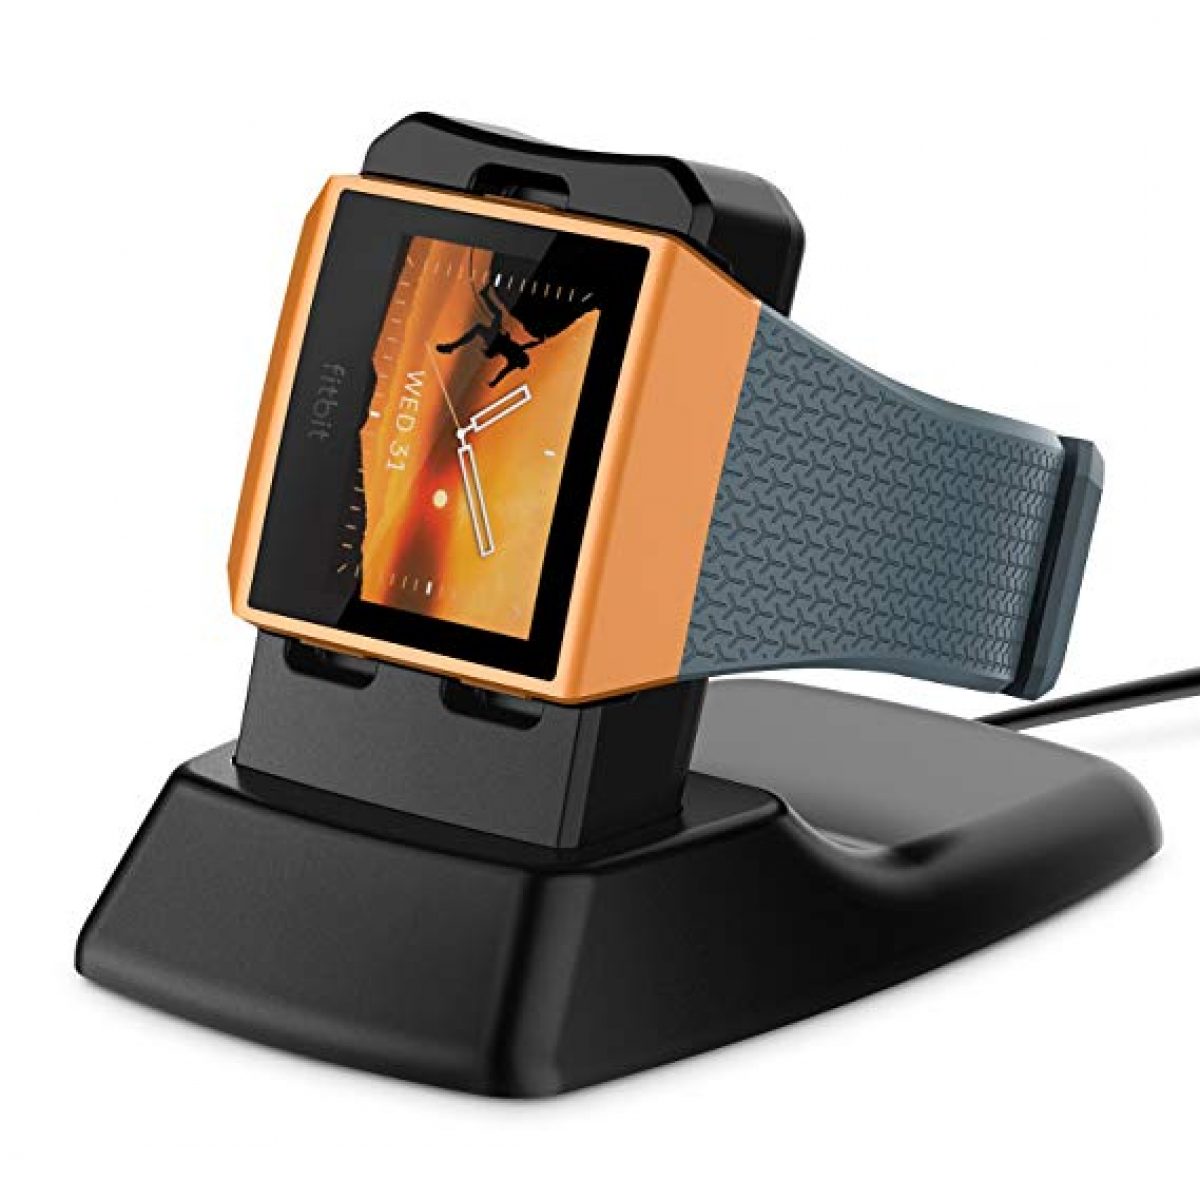 fitbit ionic charge